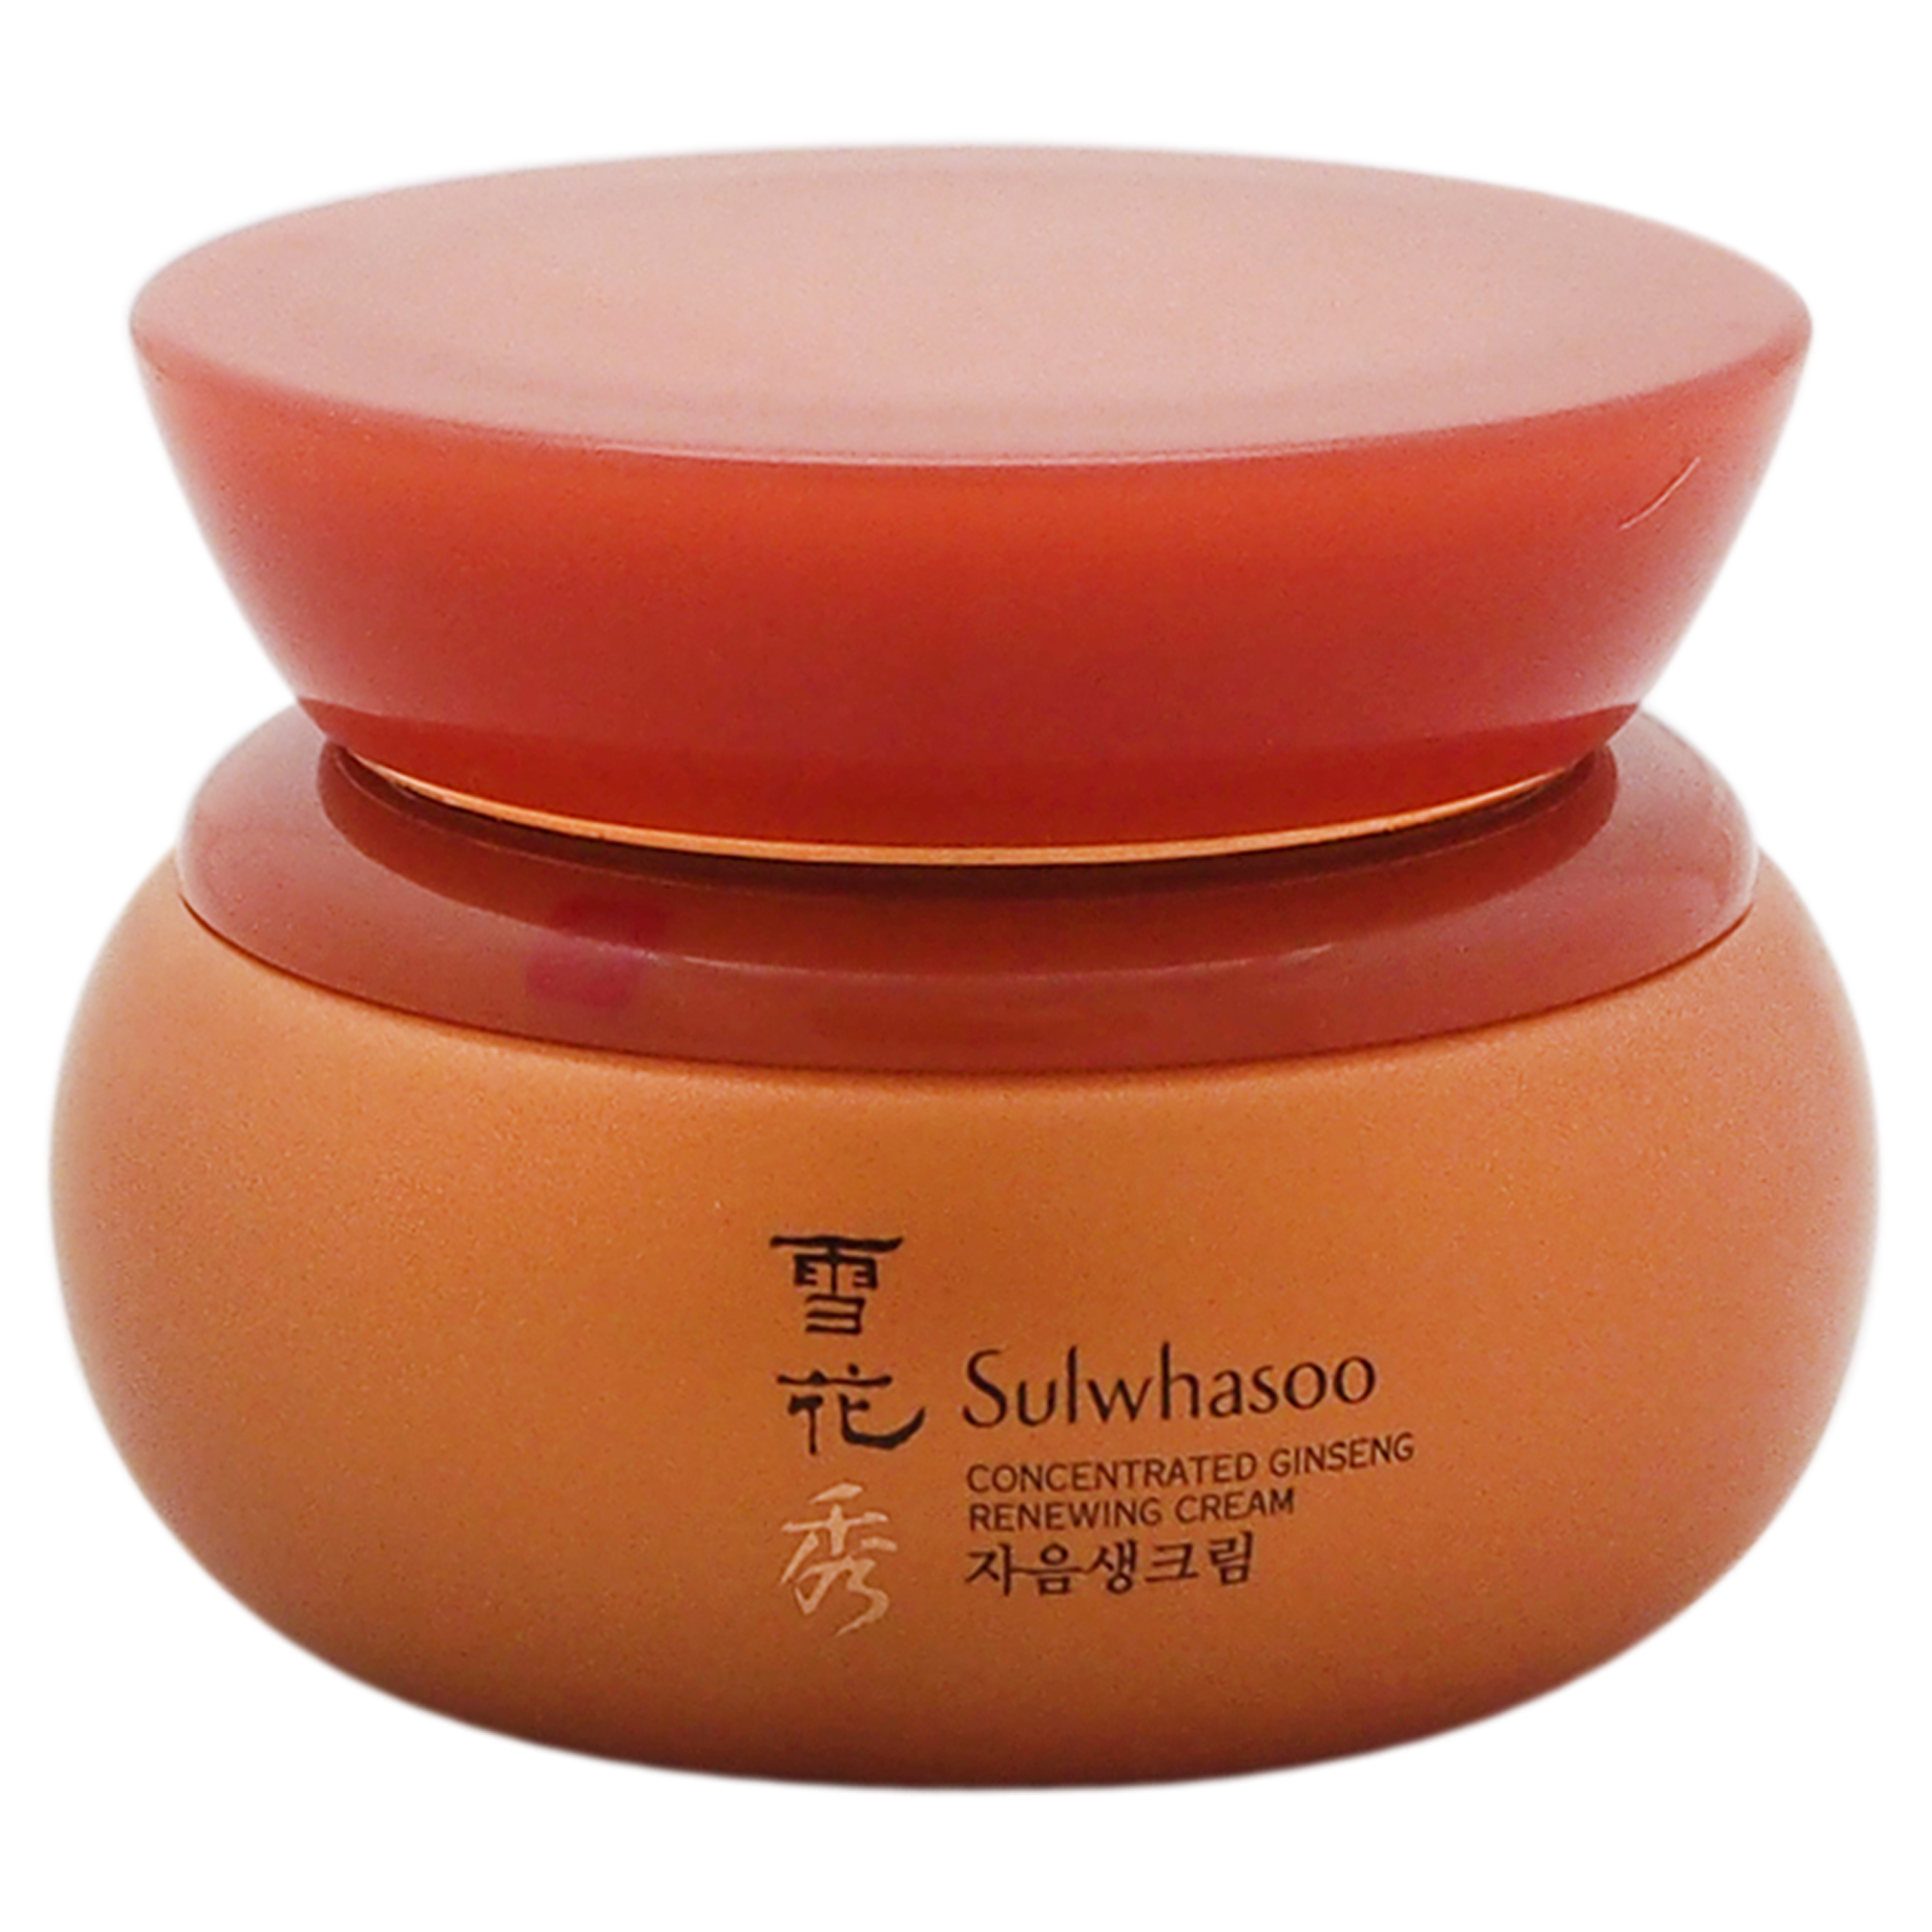 Sulwhasoo Concentrated Ginseng Renewing Facial Cream, 2.02 oz - image 2 of 3